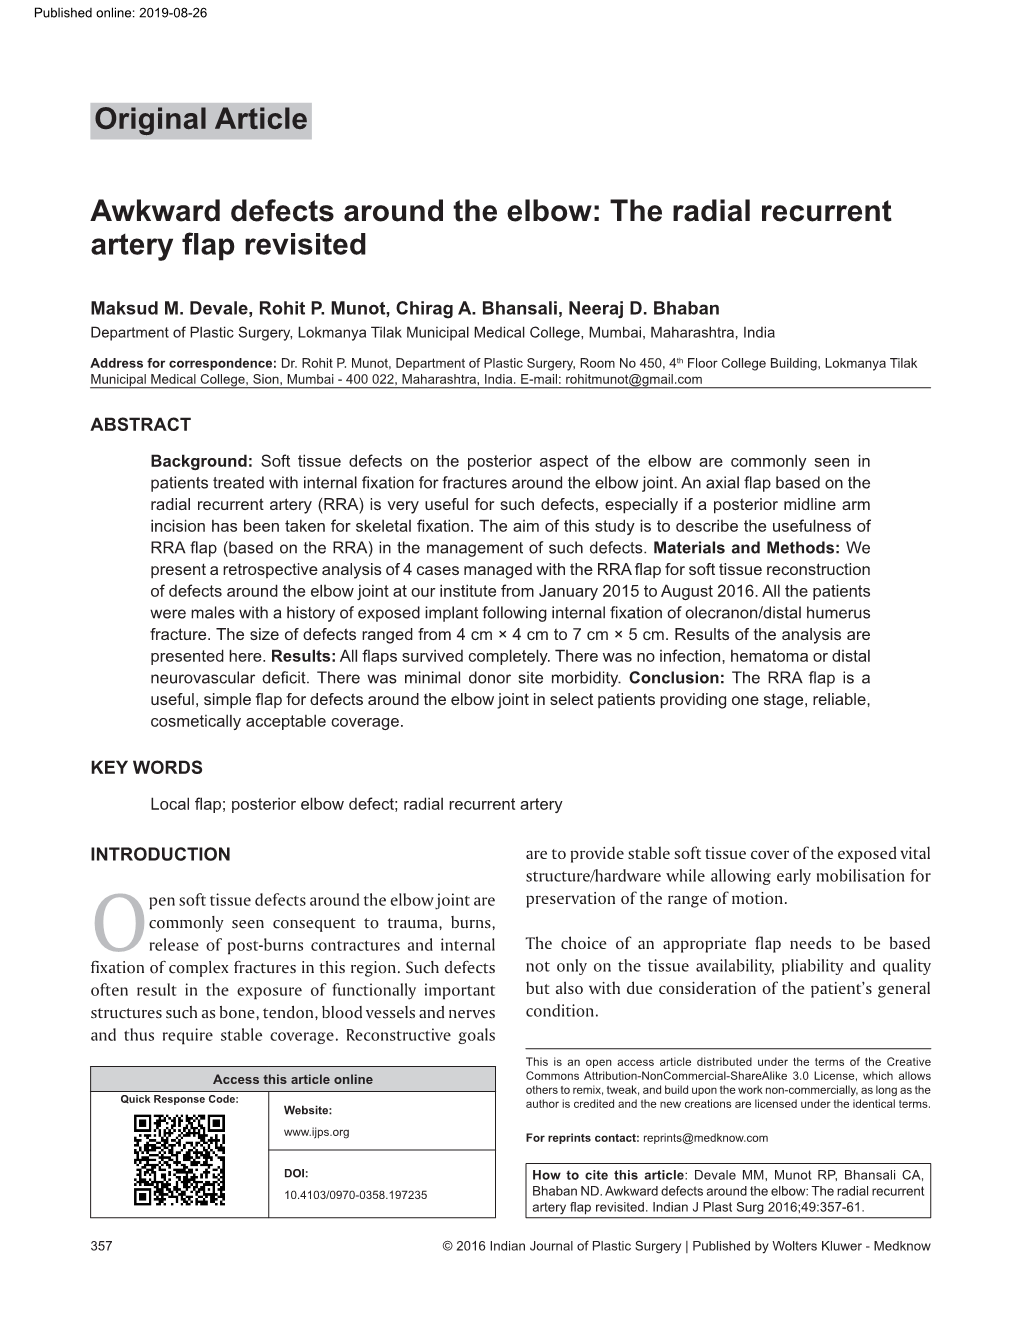 Awkward Defects Around the Elbow: the Radial Recurrent Artery Flap Revisited